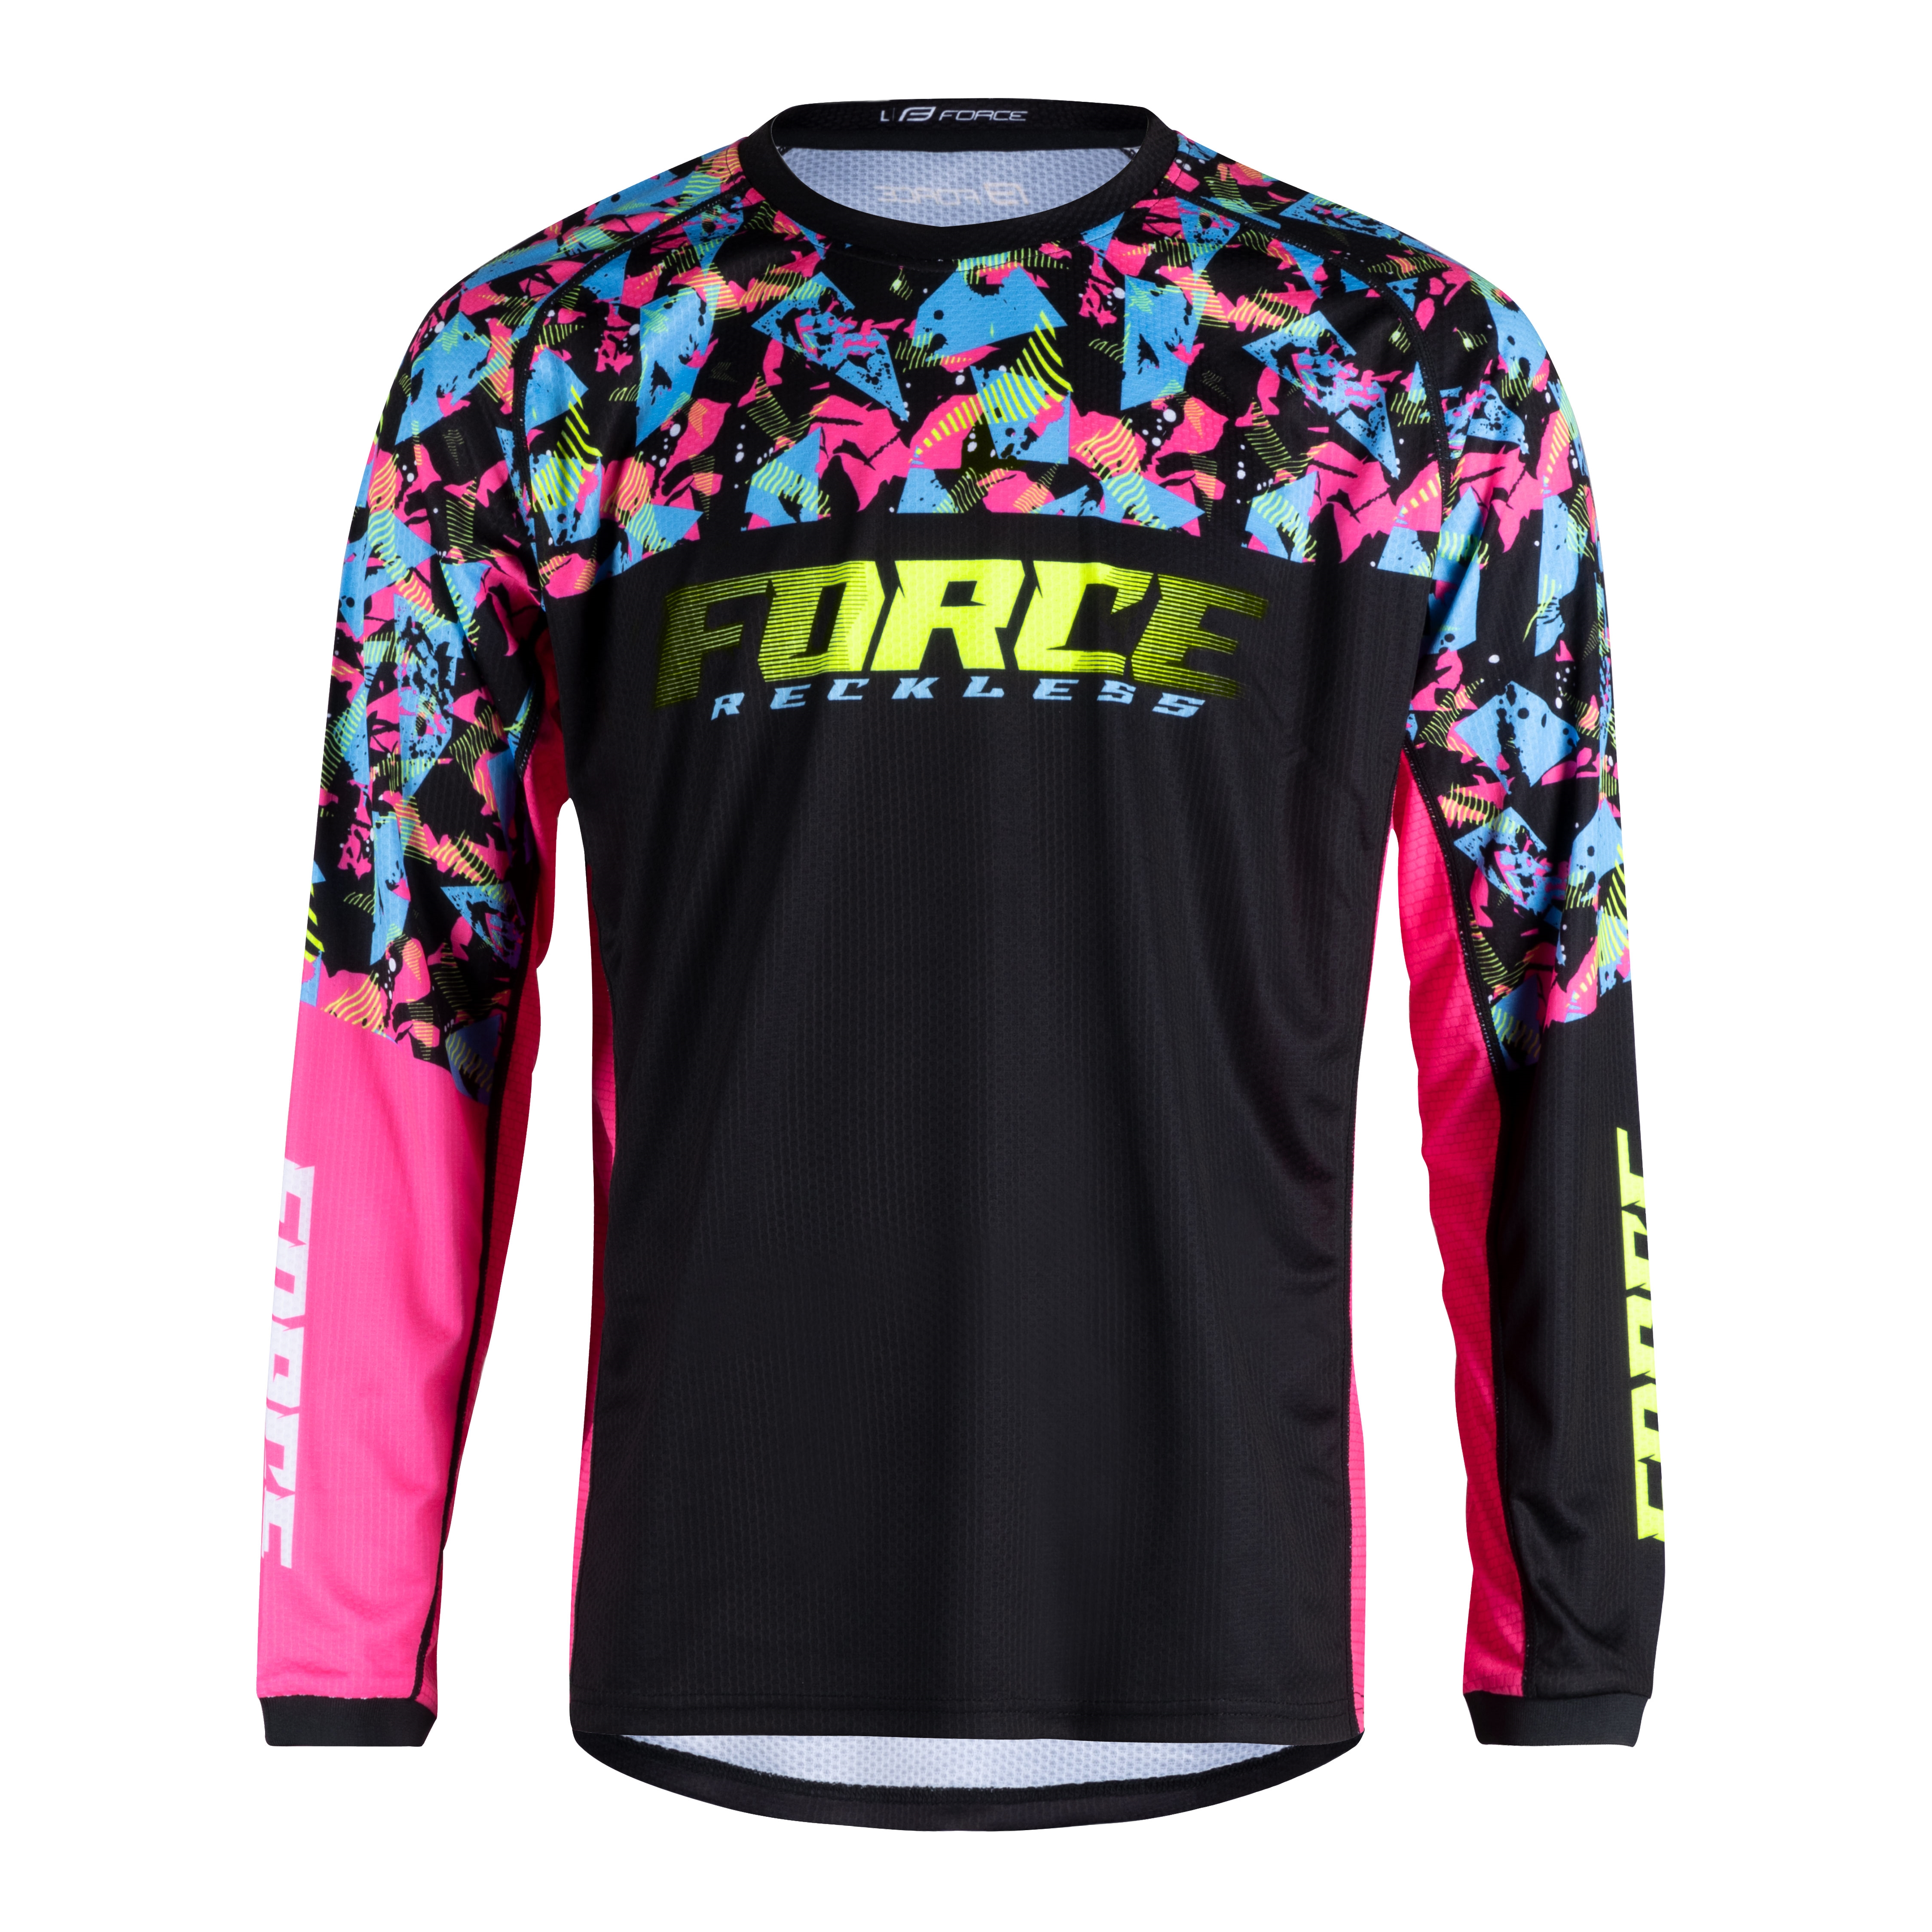 dres F RECKLESS dl. rukv, erno-rovo-fluo M